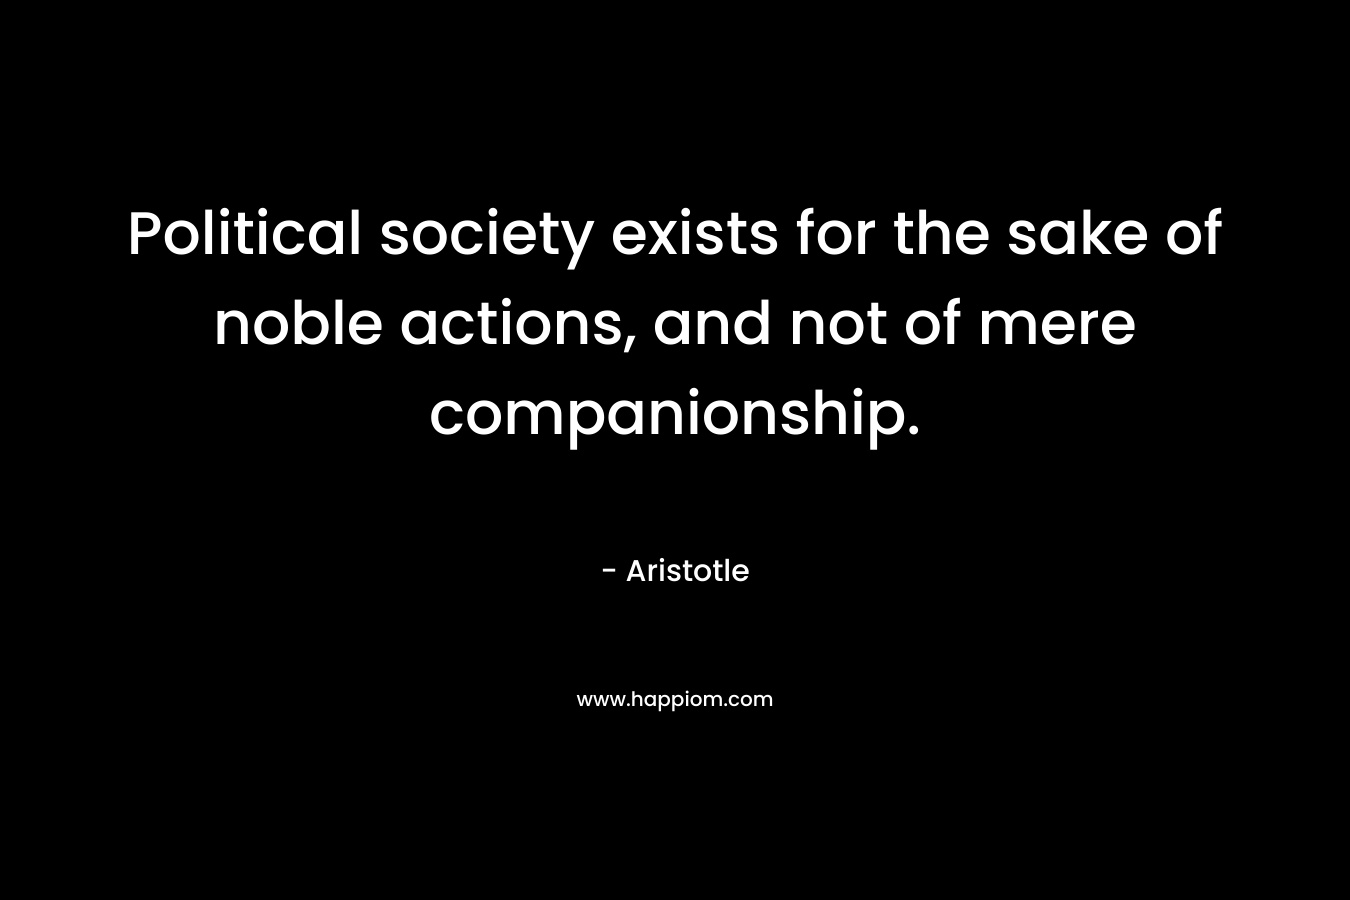 Political society exists for the sake of noble actions, and not of mere companionship.